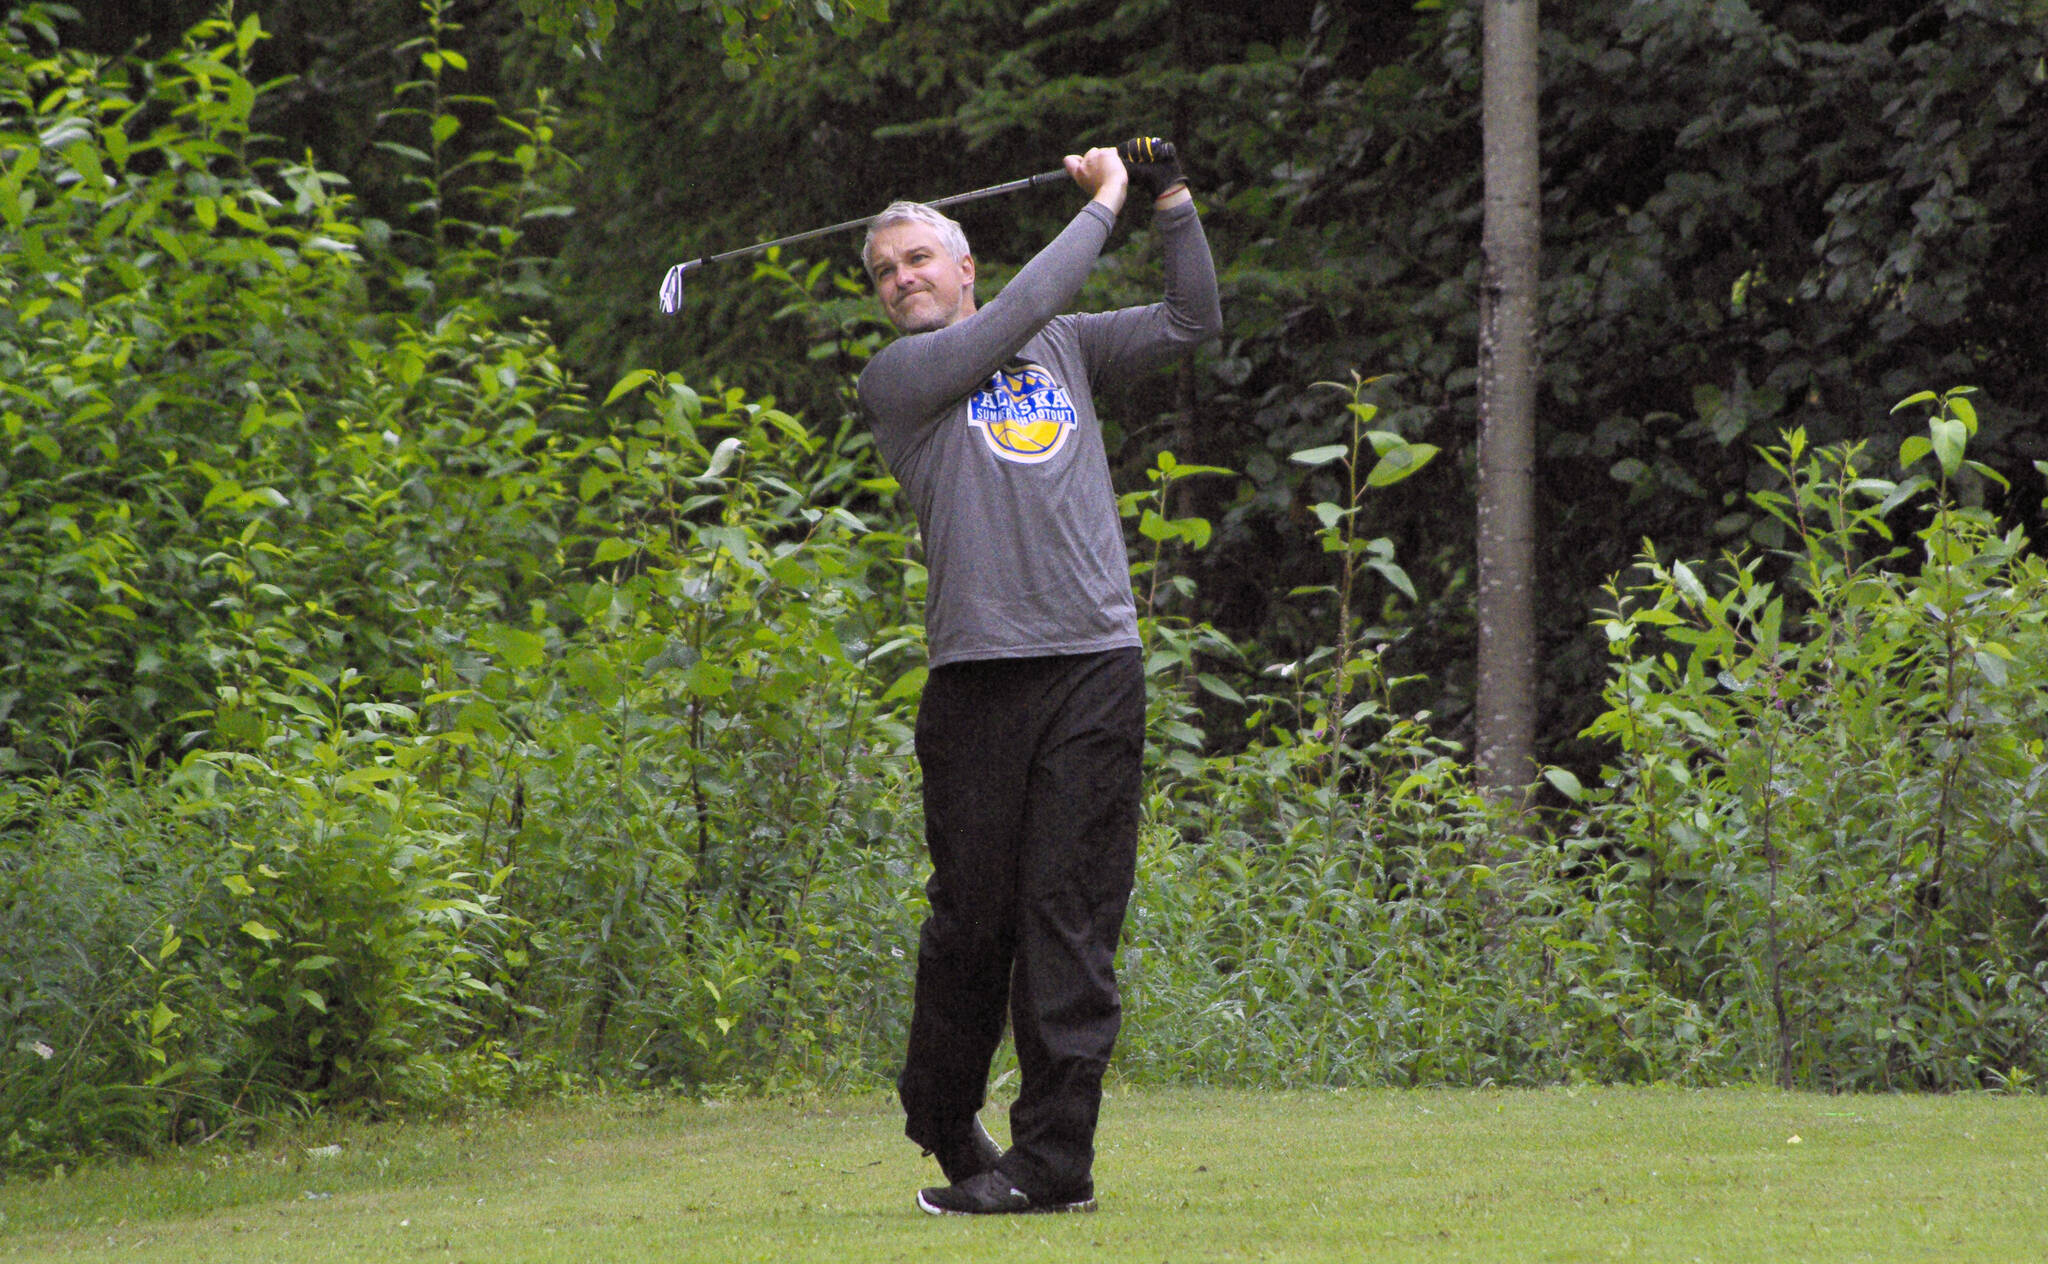 Nolan Rose tees off on No. 18 on Sunday, July 17, 2022, at the Kenai Peninsula Open and Pro-Am at Birch Ridge Golf Course in Soldotna, Alaska. Rose won the amateur division.